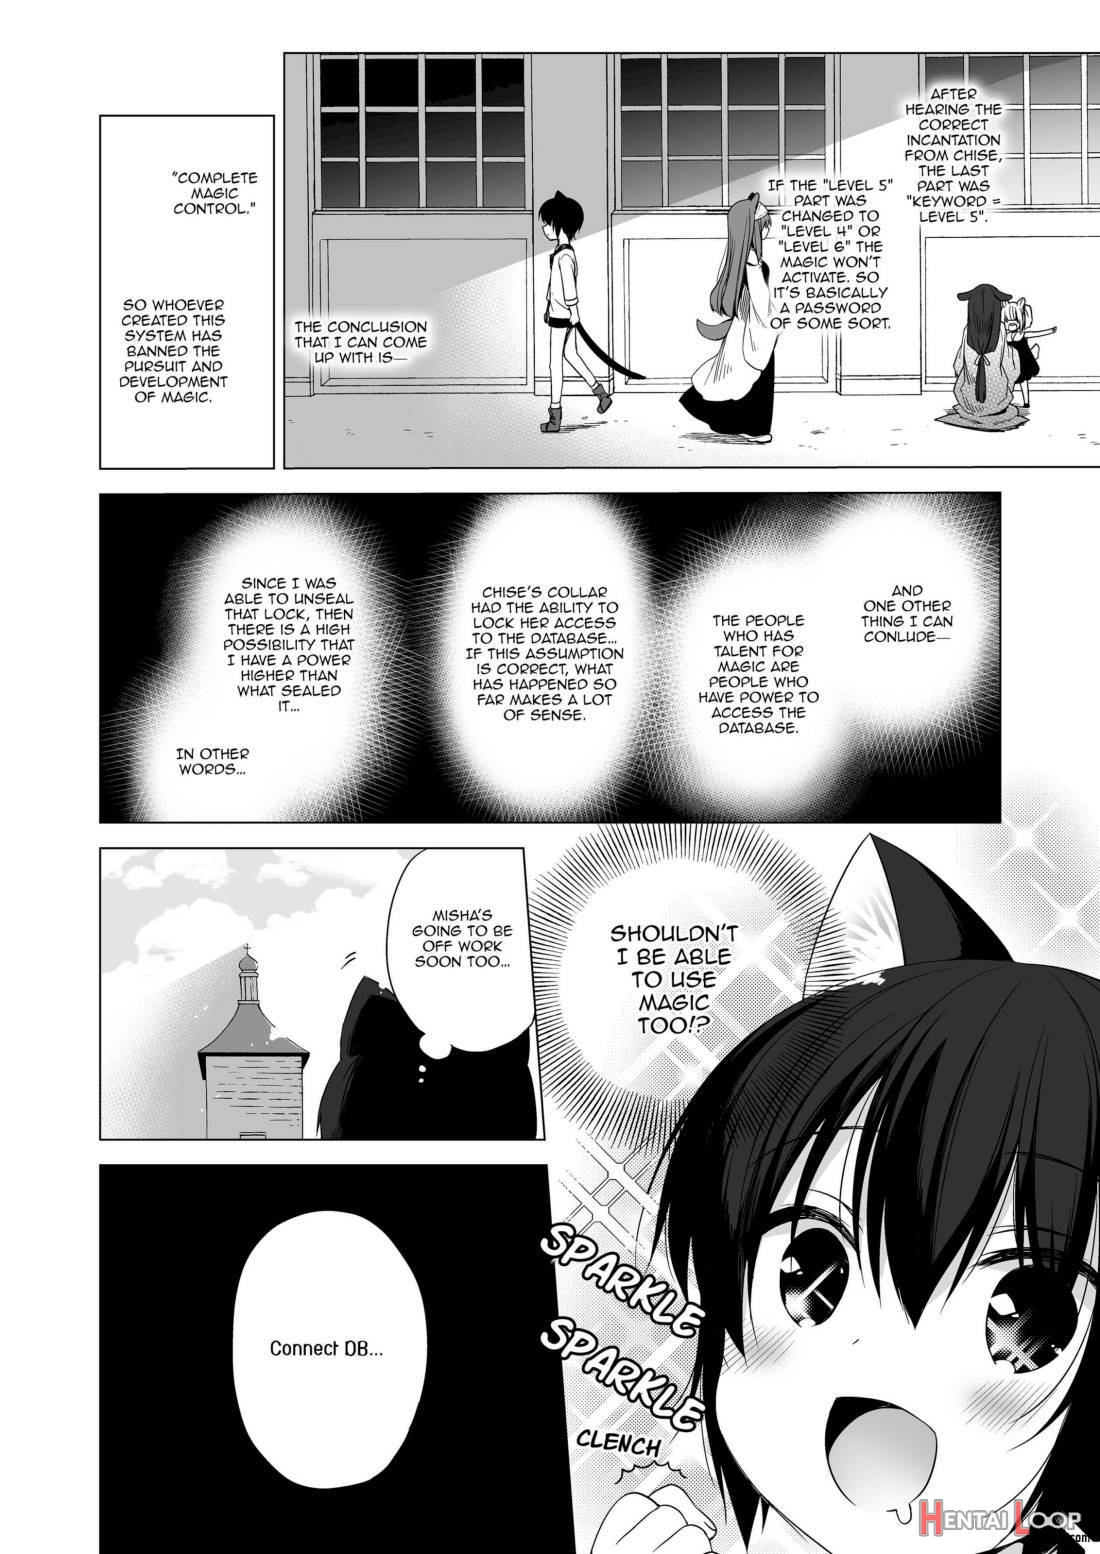 My Ideal Life in Another World Vol. 5 page 16